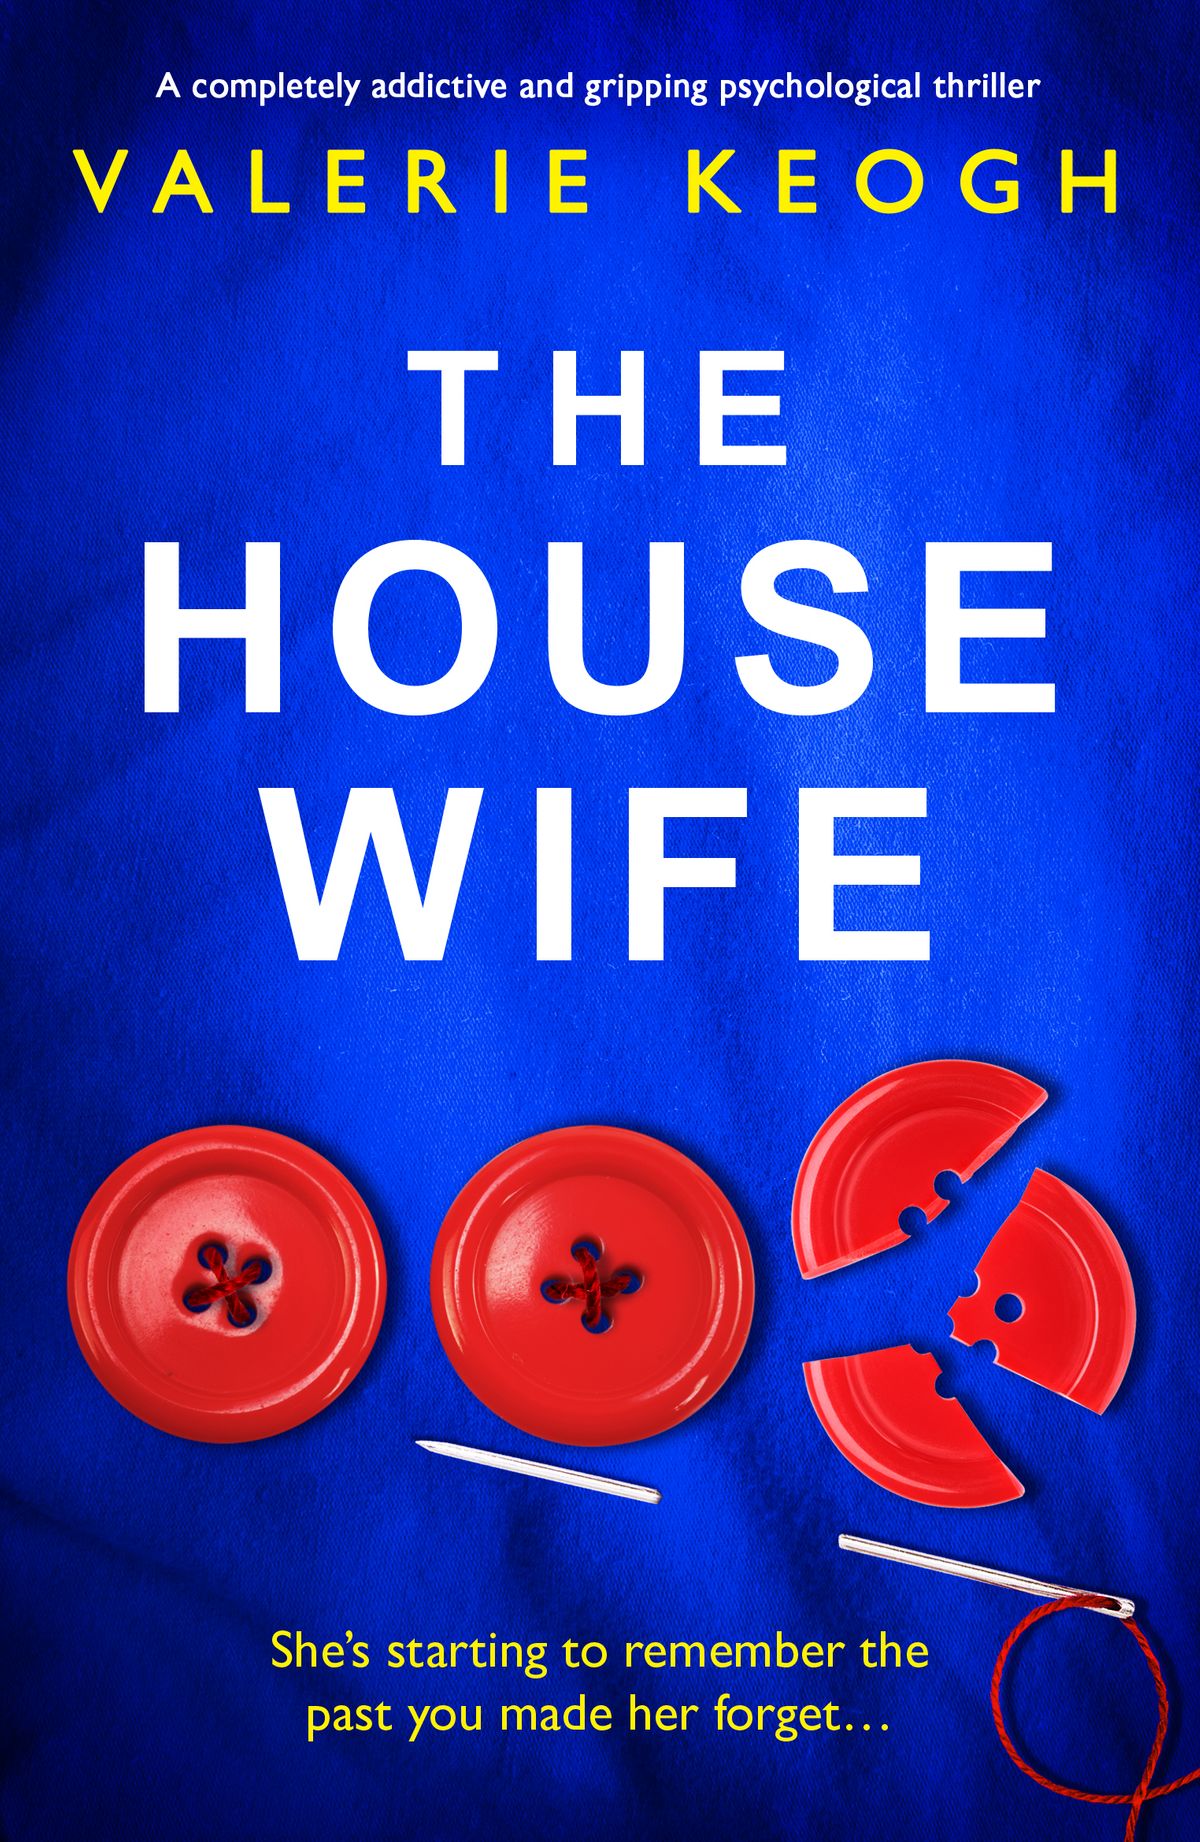 Valerie Keogh – The Housewife